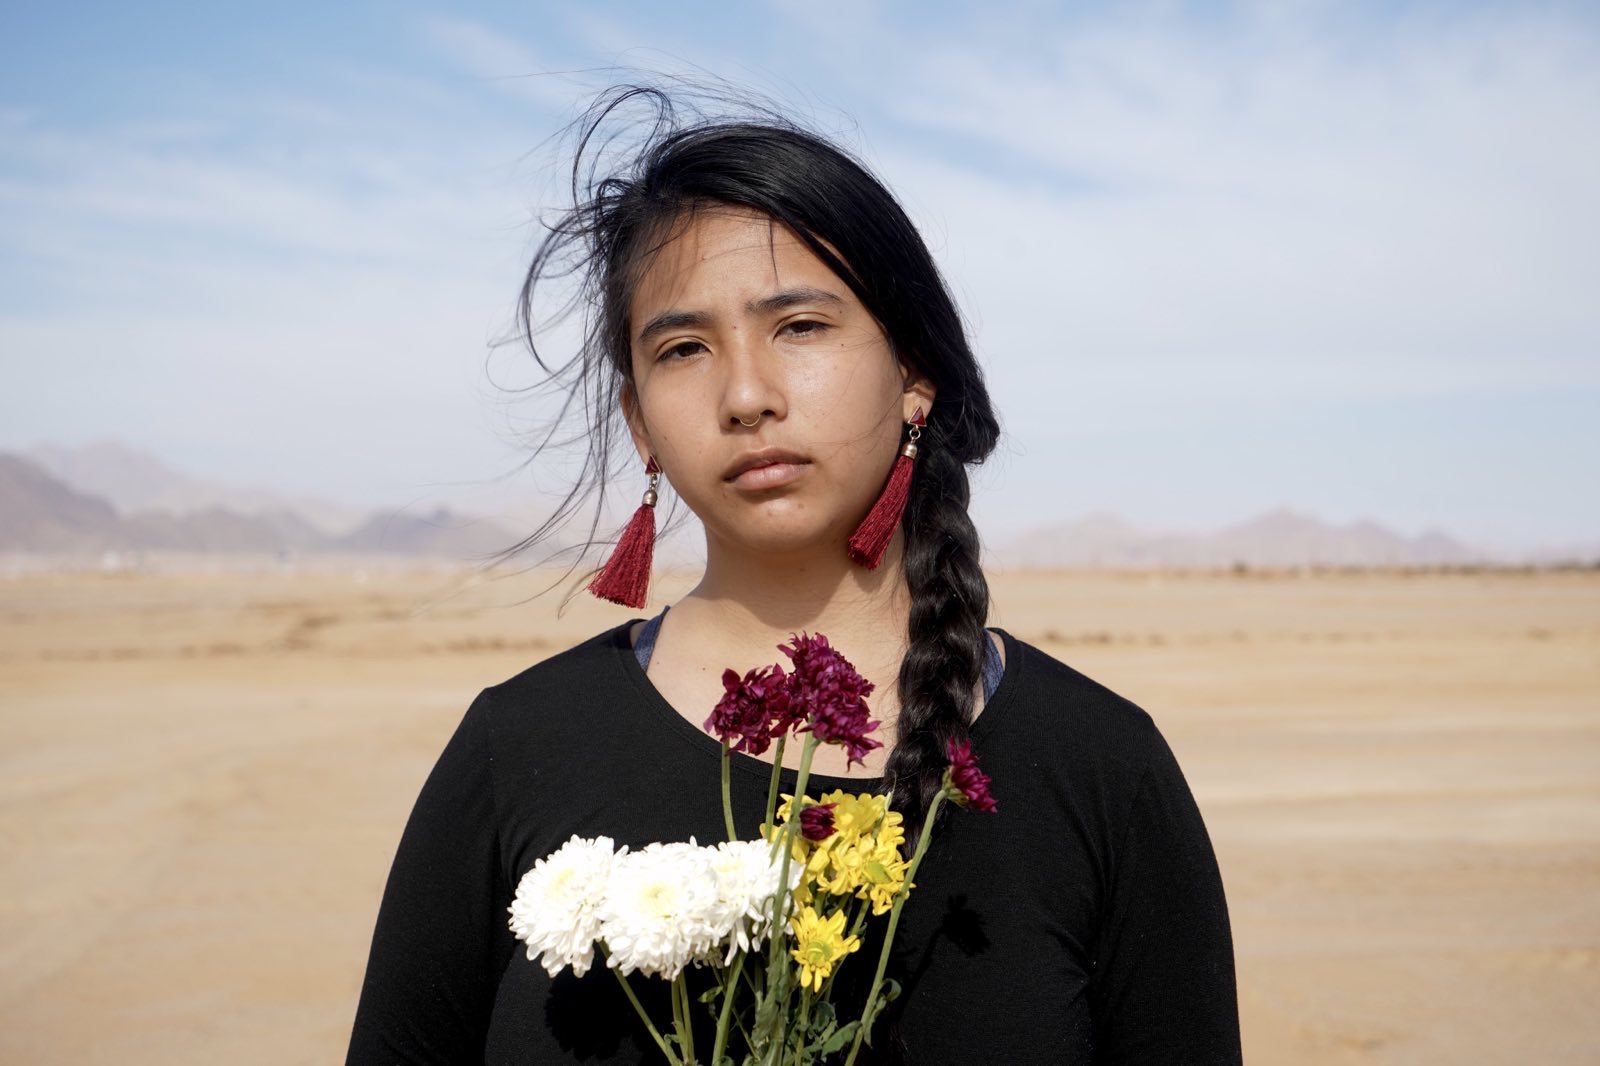 Alexia Leclercq looks at the camera while standing in the desert